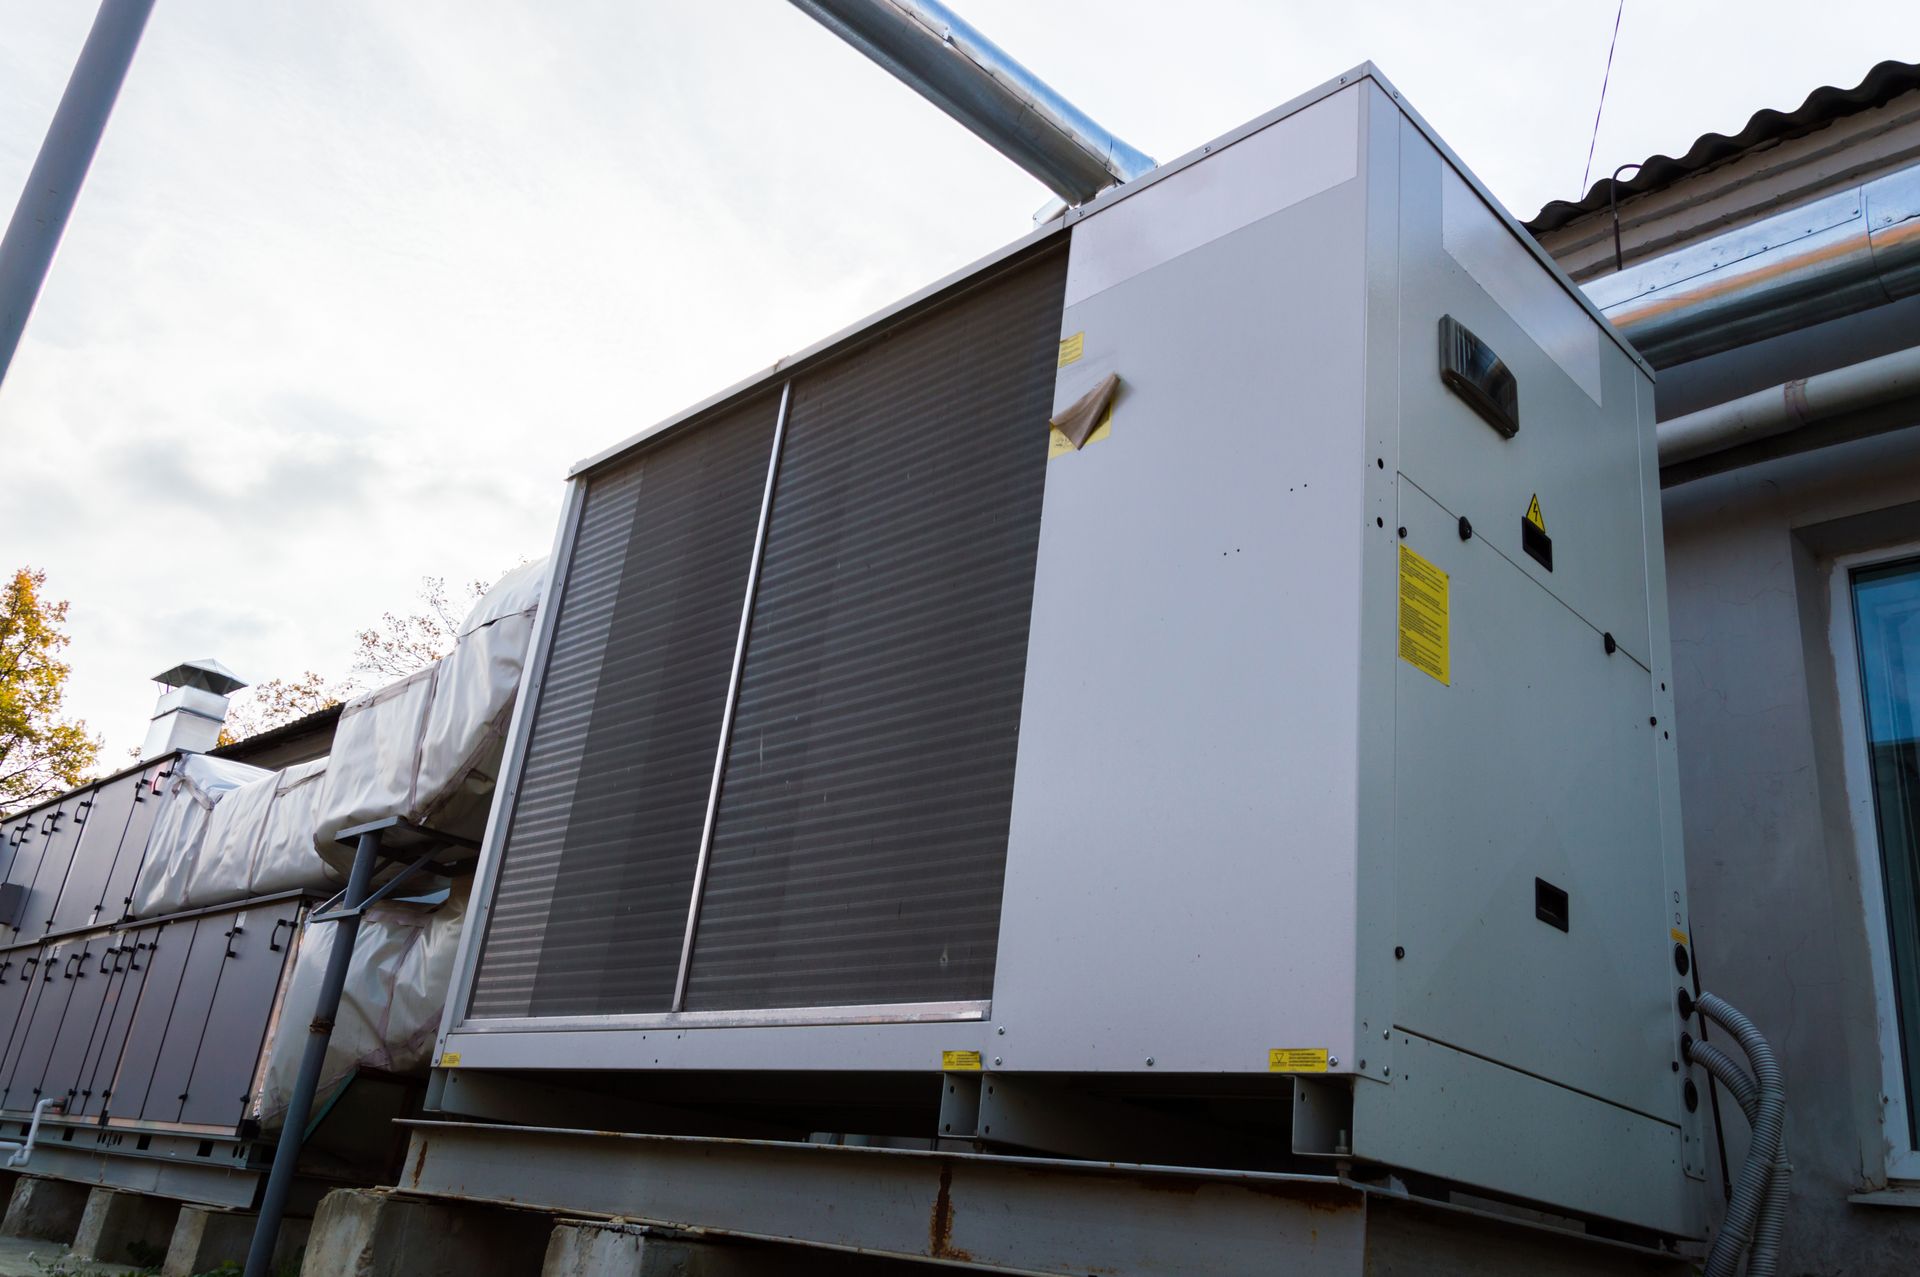 Air Handler, used to showcase the difference between fan coil units and air handlers